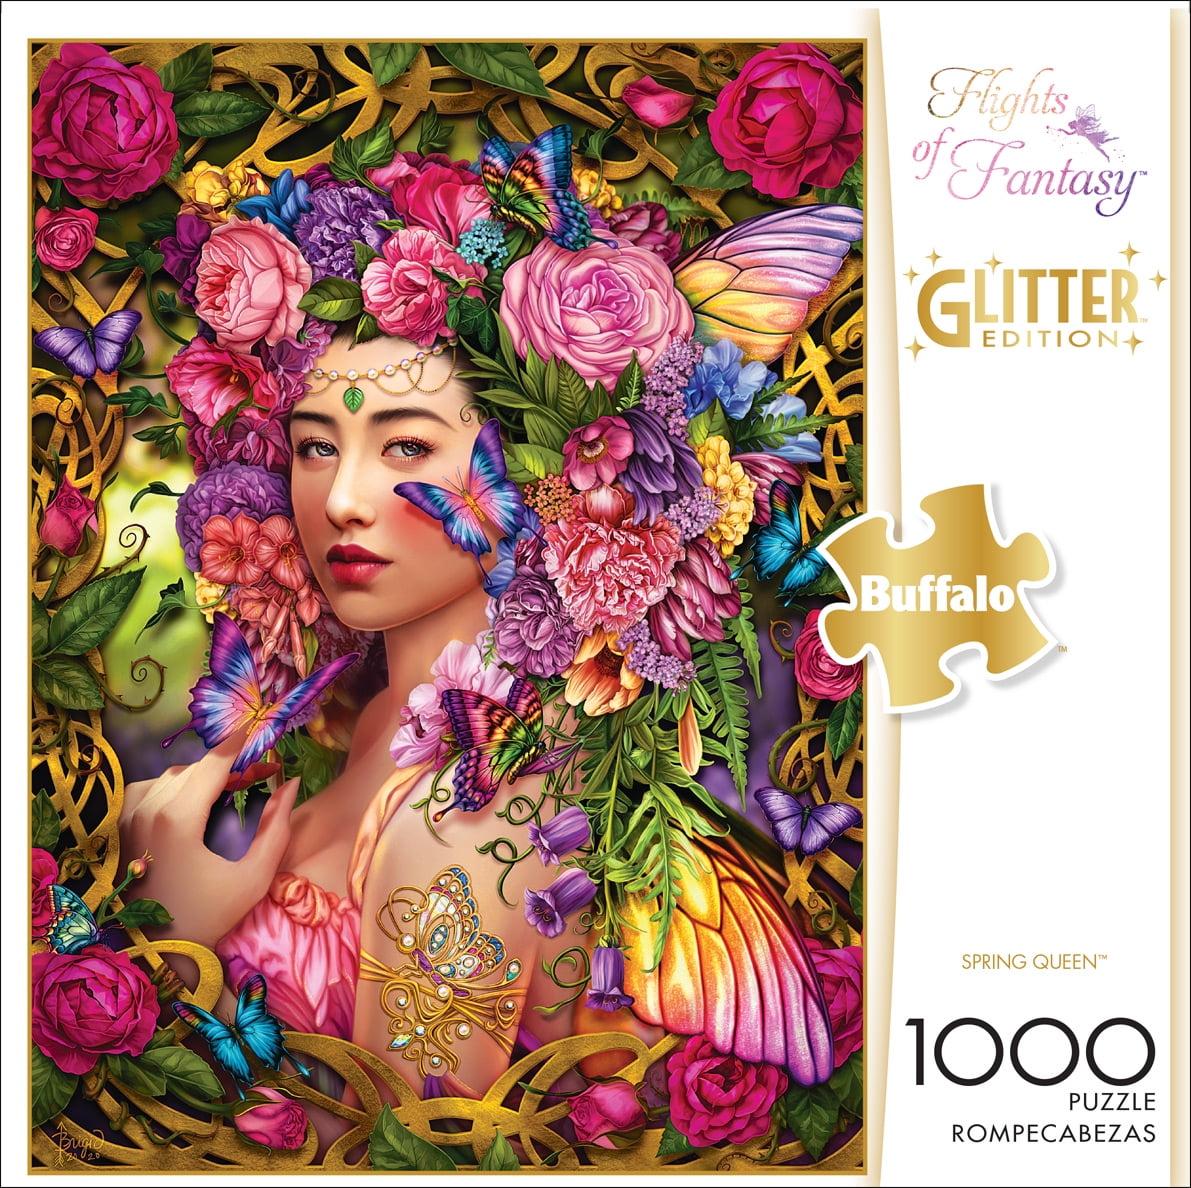 Buffalo Flights of Fantasy Glitter Edition Jigsaw 1000pc Puzzle for sale online 